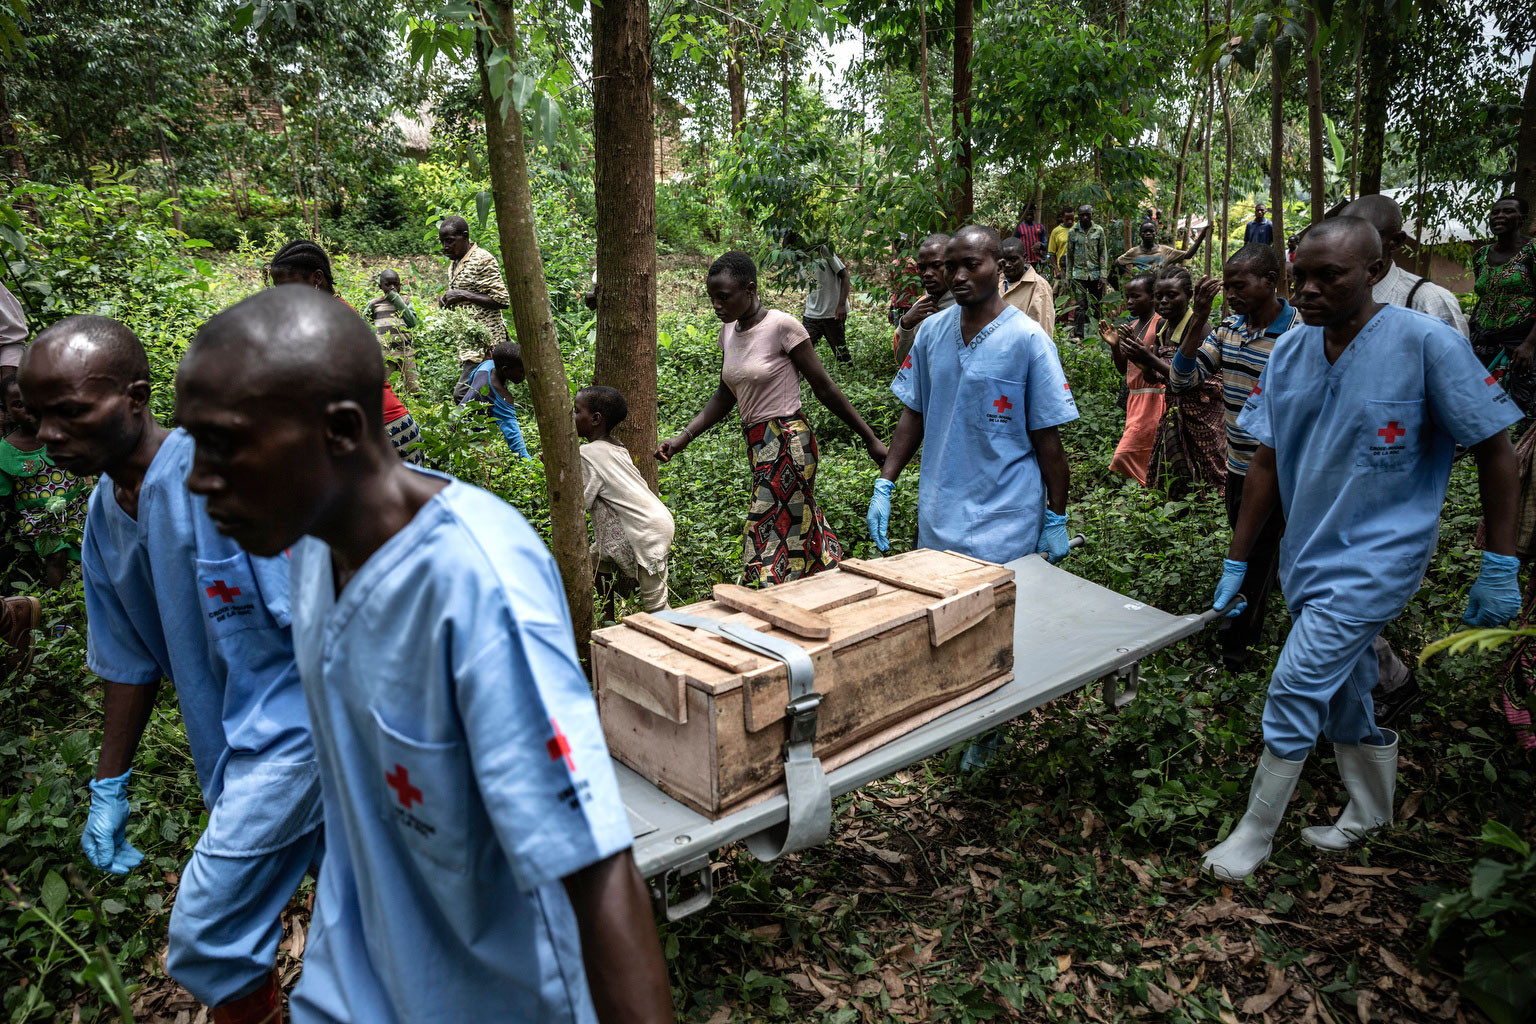 Rutshuru in Congo’s North Kivu Province, February 2020, Red Cross burial workers carry the body of the 11-month old girl © Finbarr O’Reilly for Fondation Carmignac